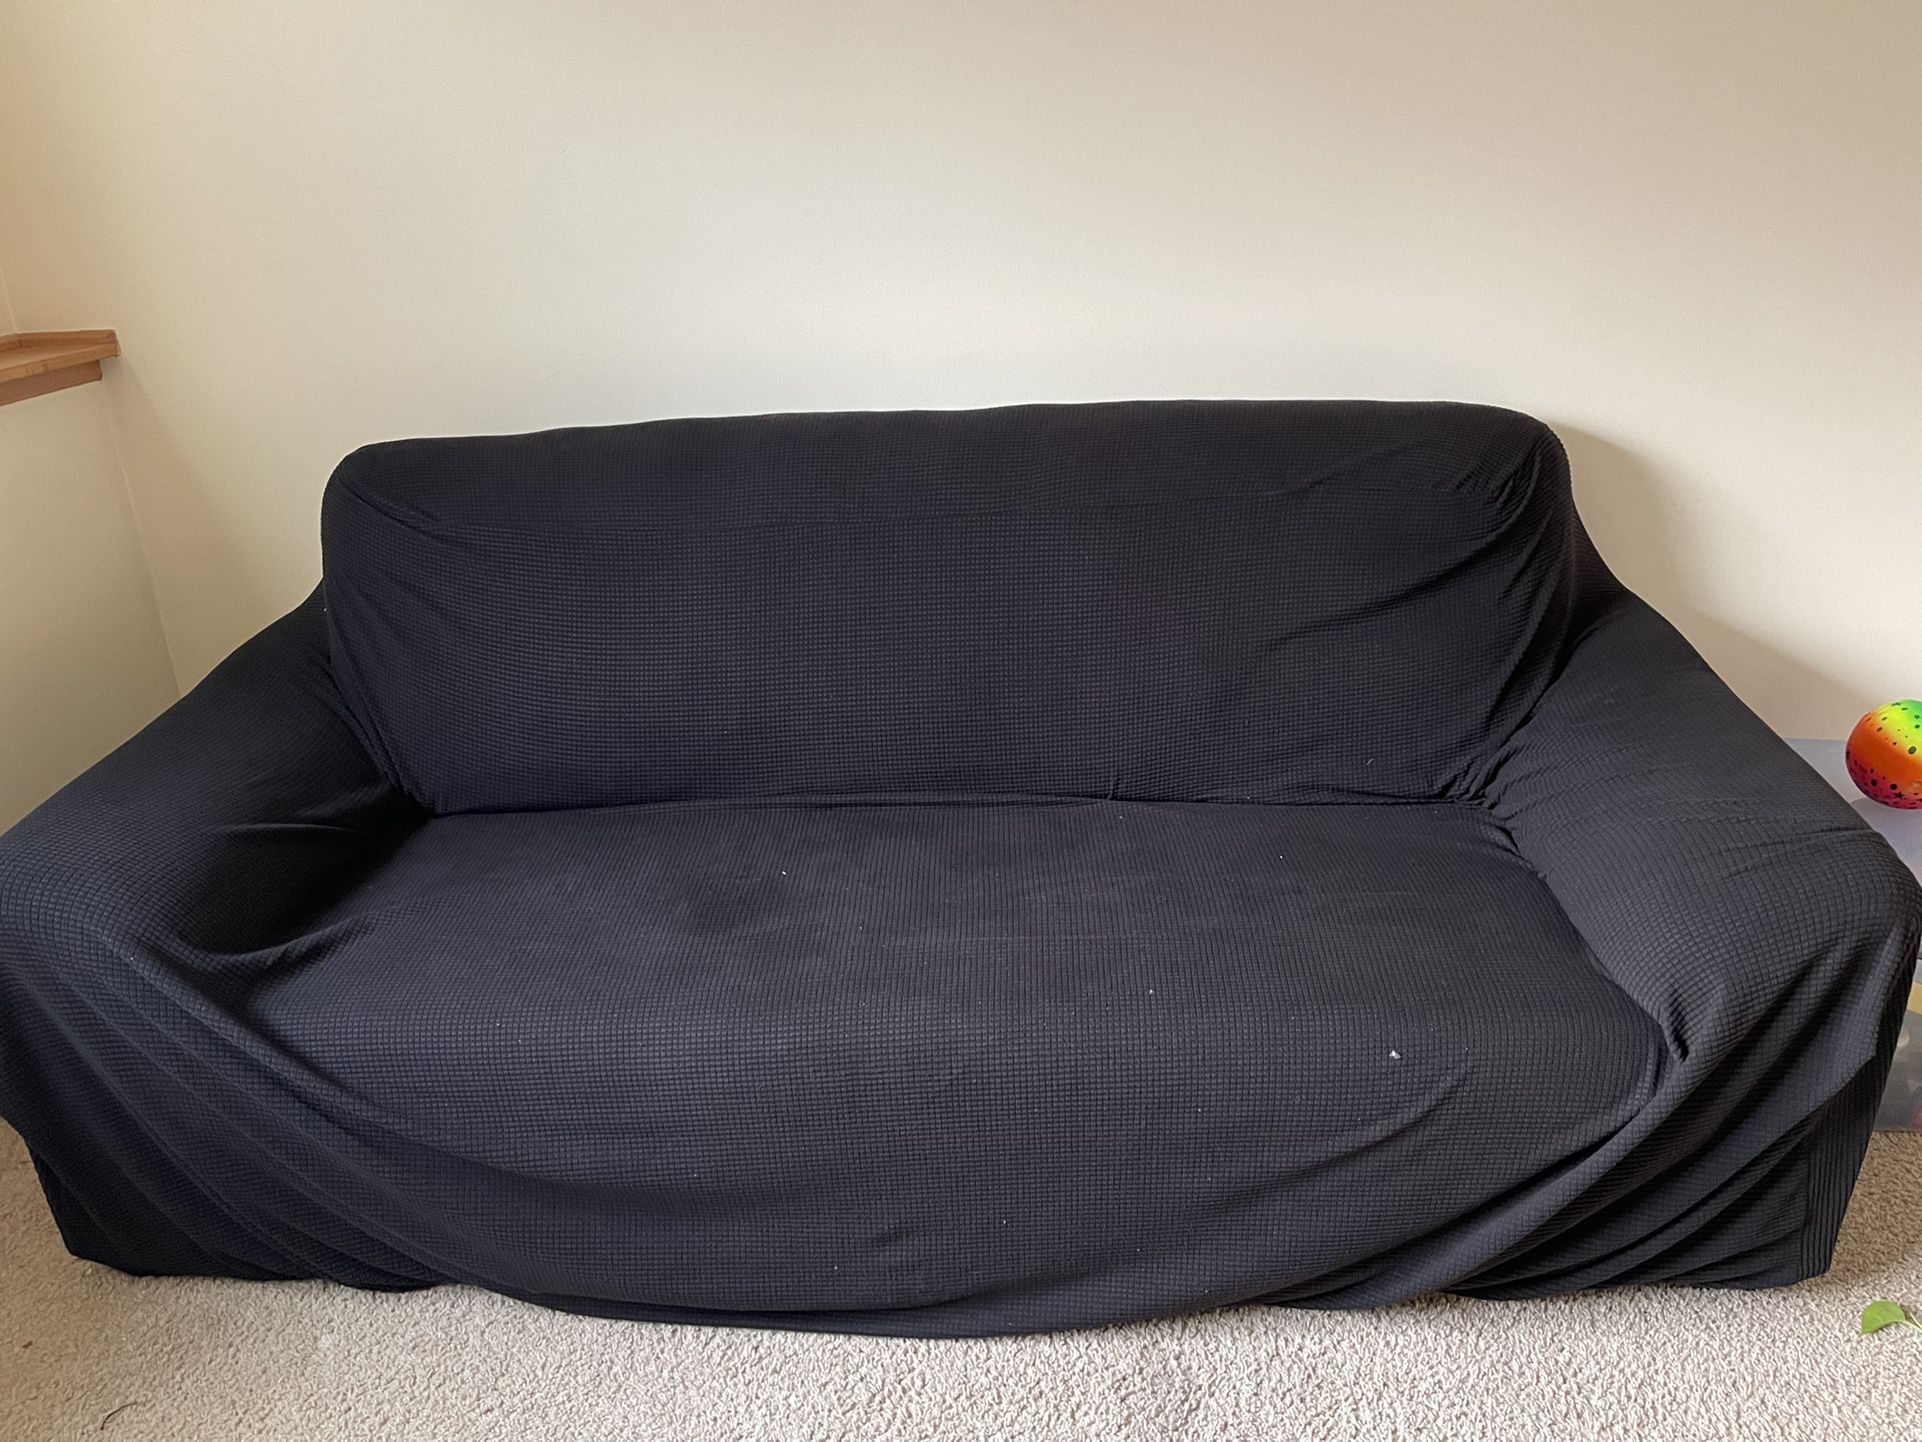 Free Ikea Sofa With Cover (Synthetic Leather)